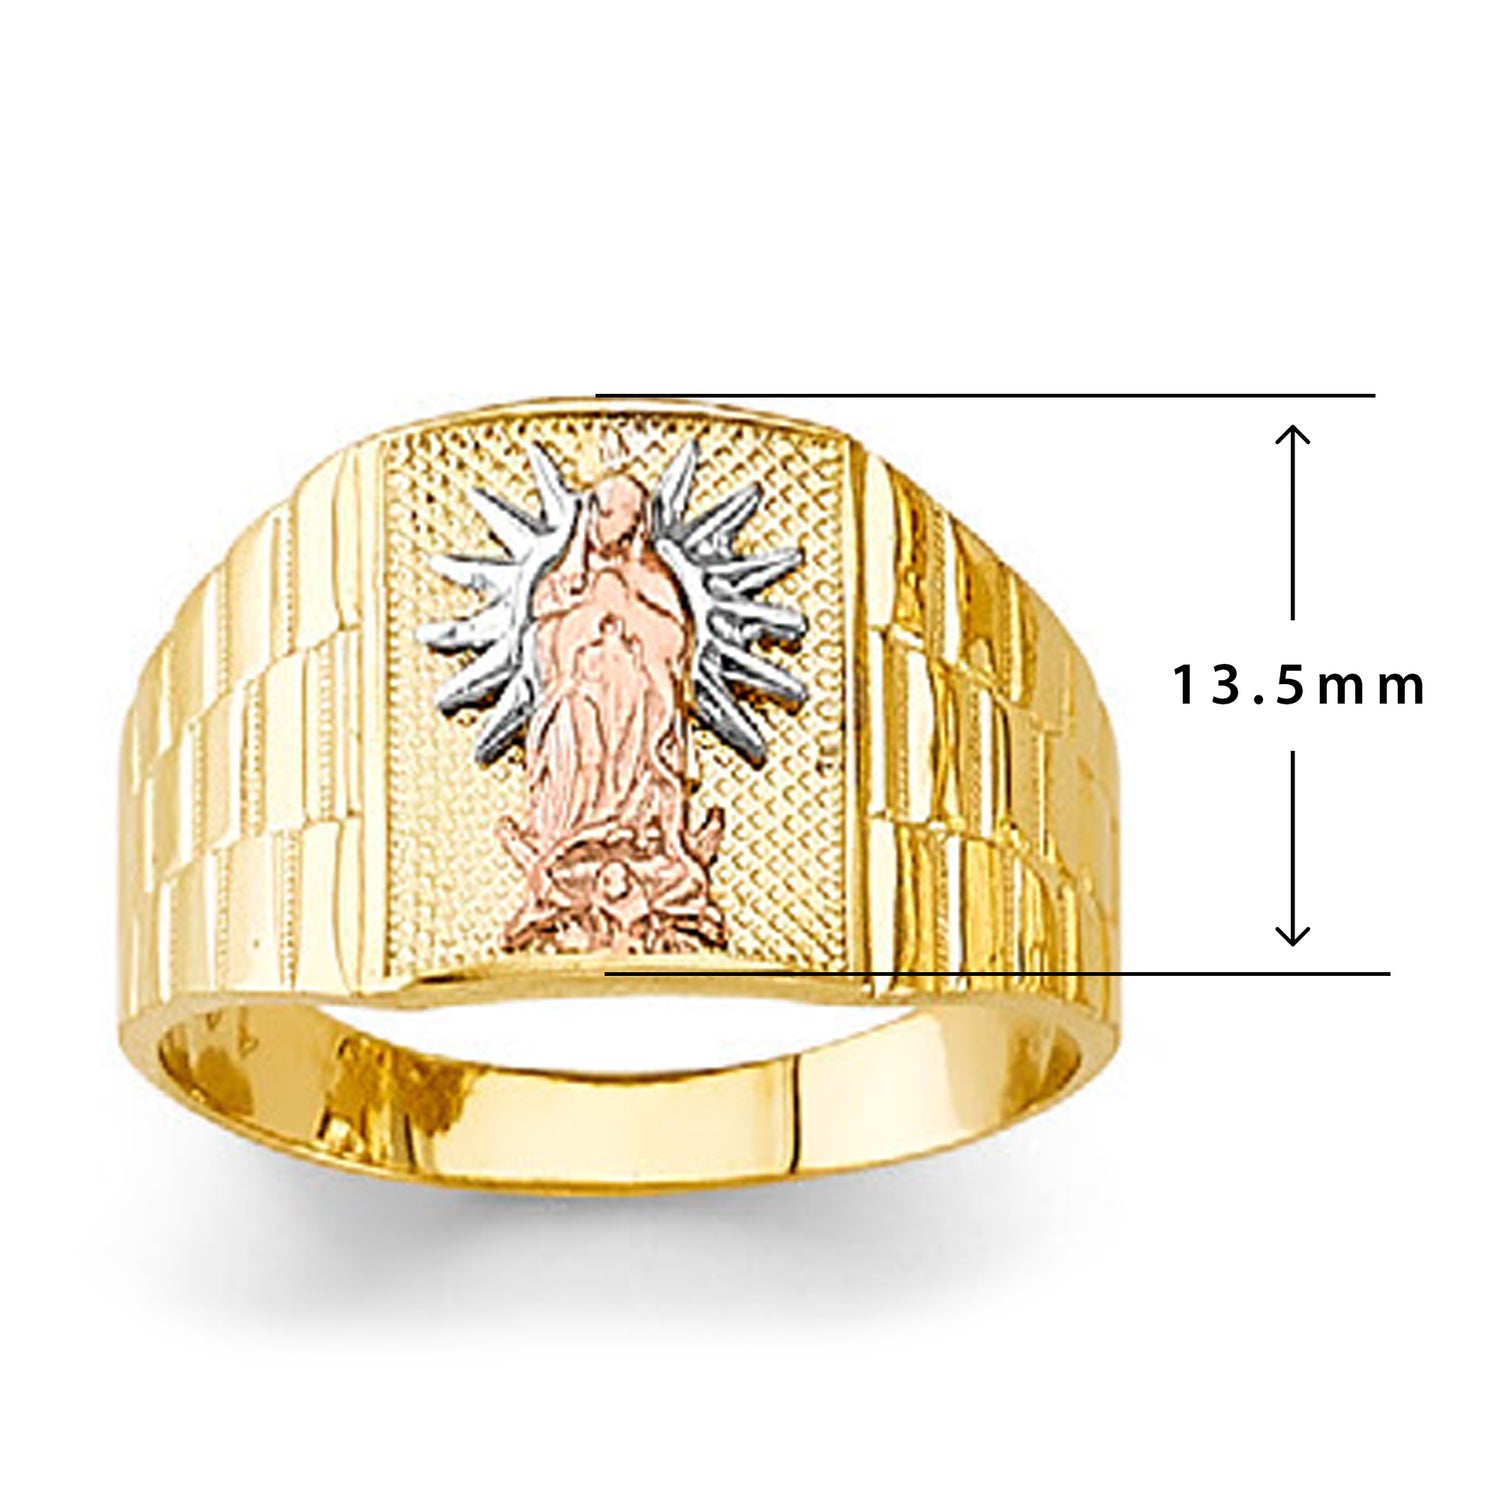 Tri-tone Religious Vibrant Rays Ring in Solid Gold with Measurement